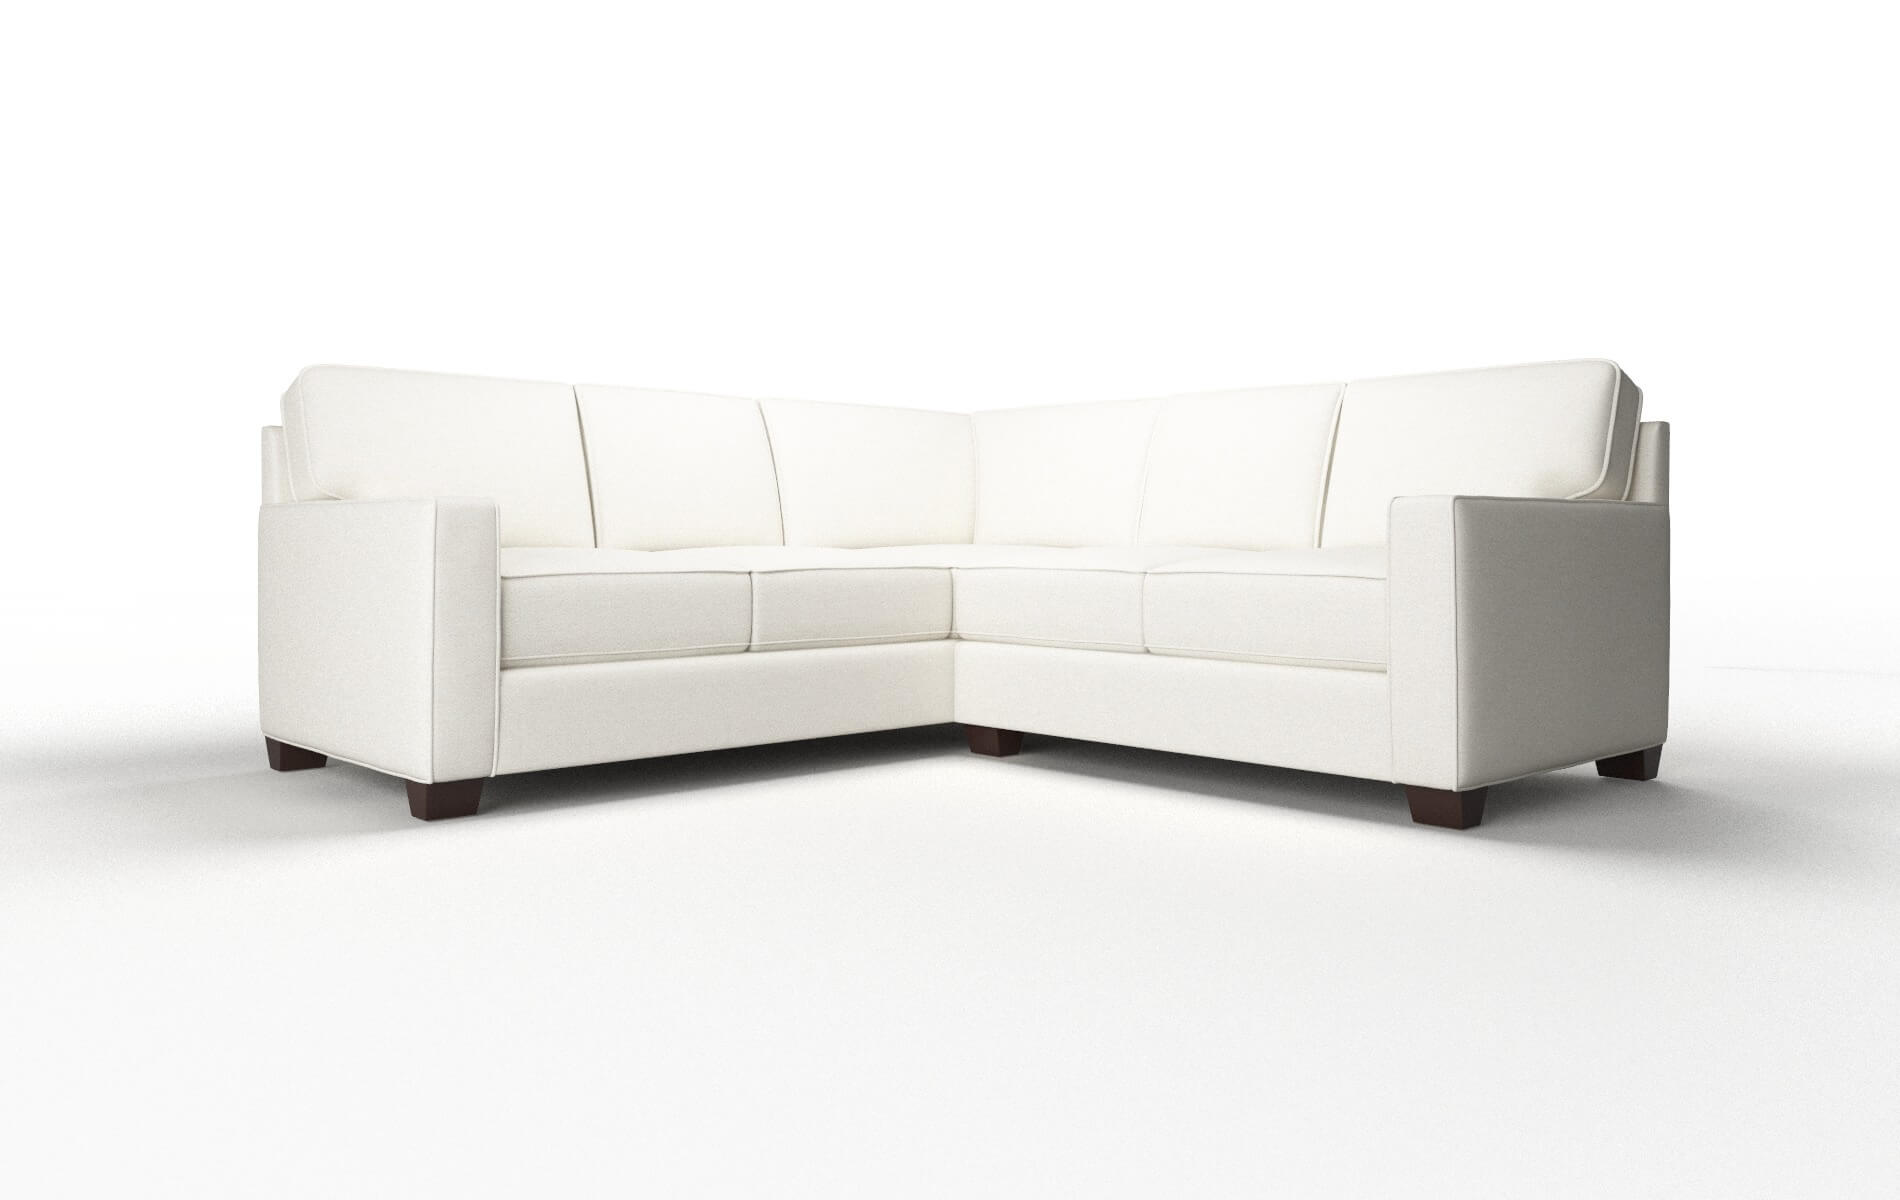 Chicago Catalina Ivory Sectional espresso legs 1